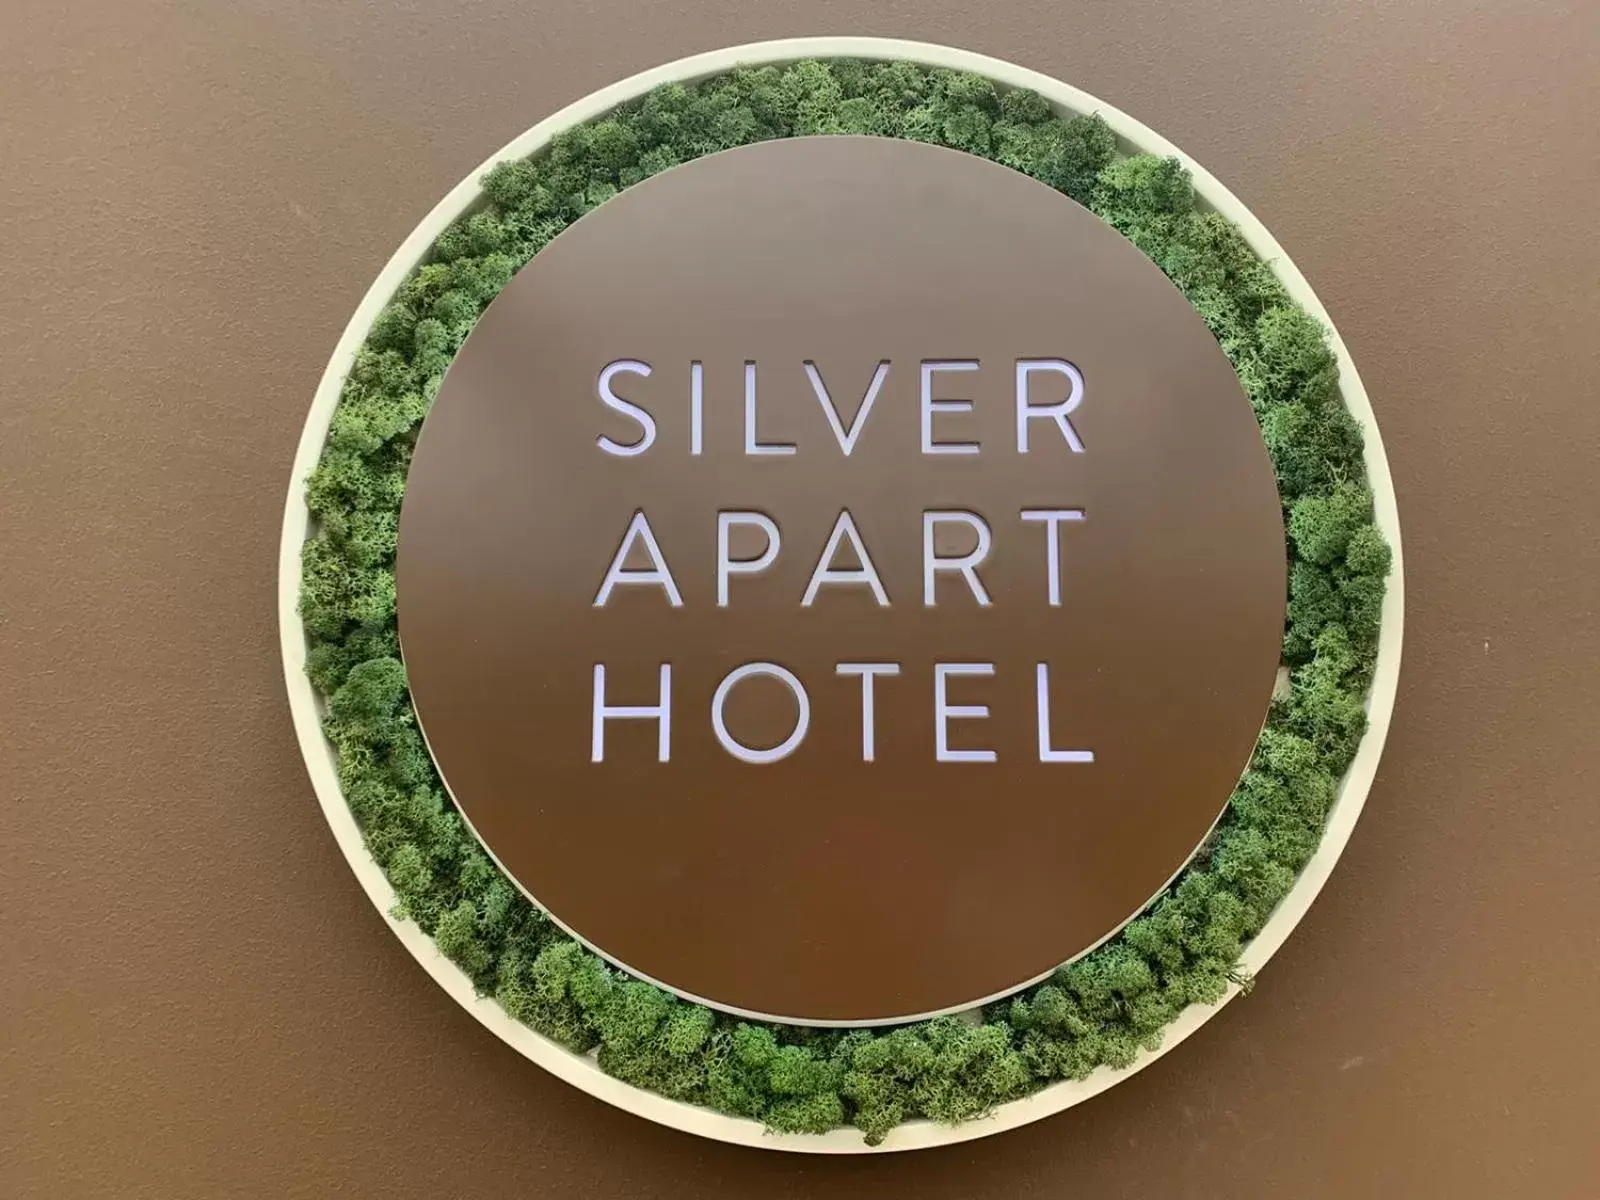 Property logo or sign in Aparthotel Silver